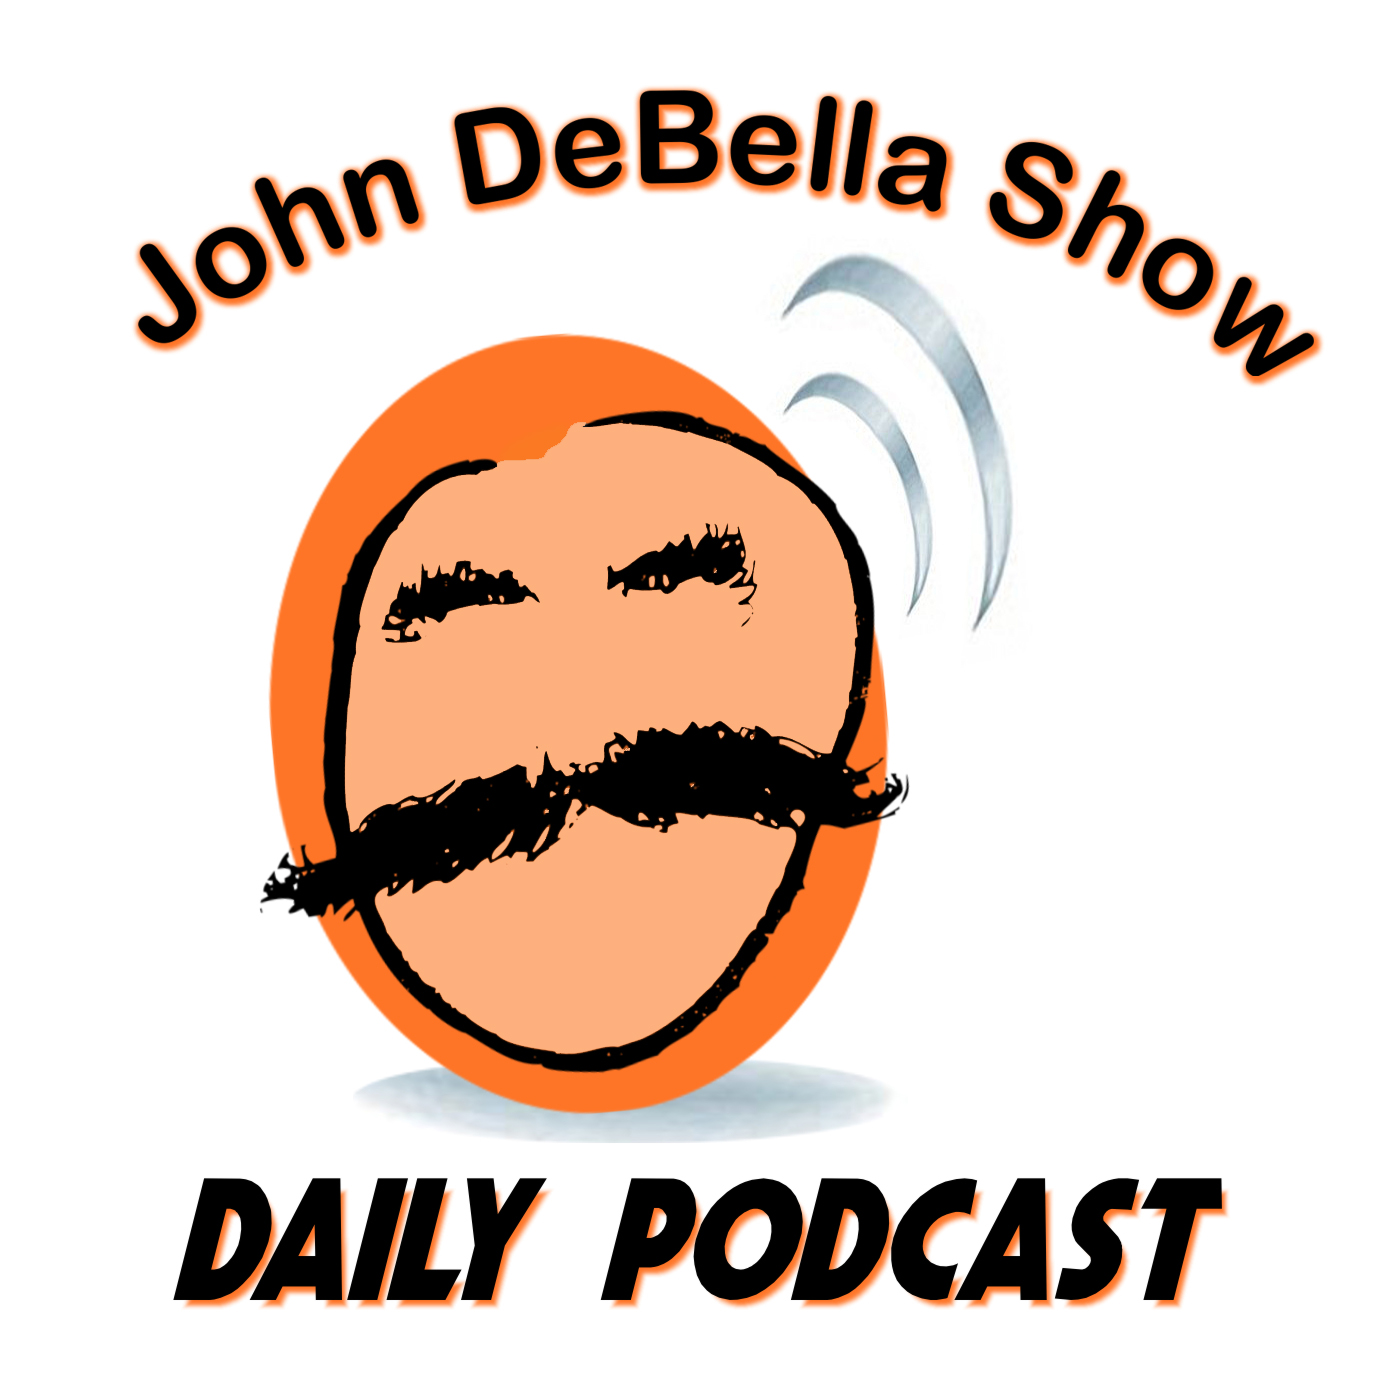 The Daily Podcast (06/22/21)